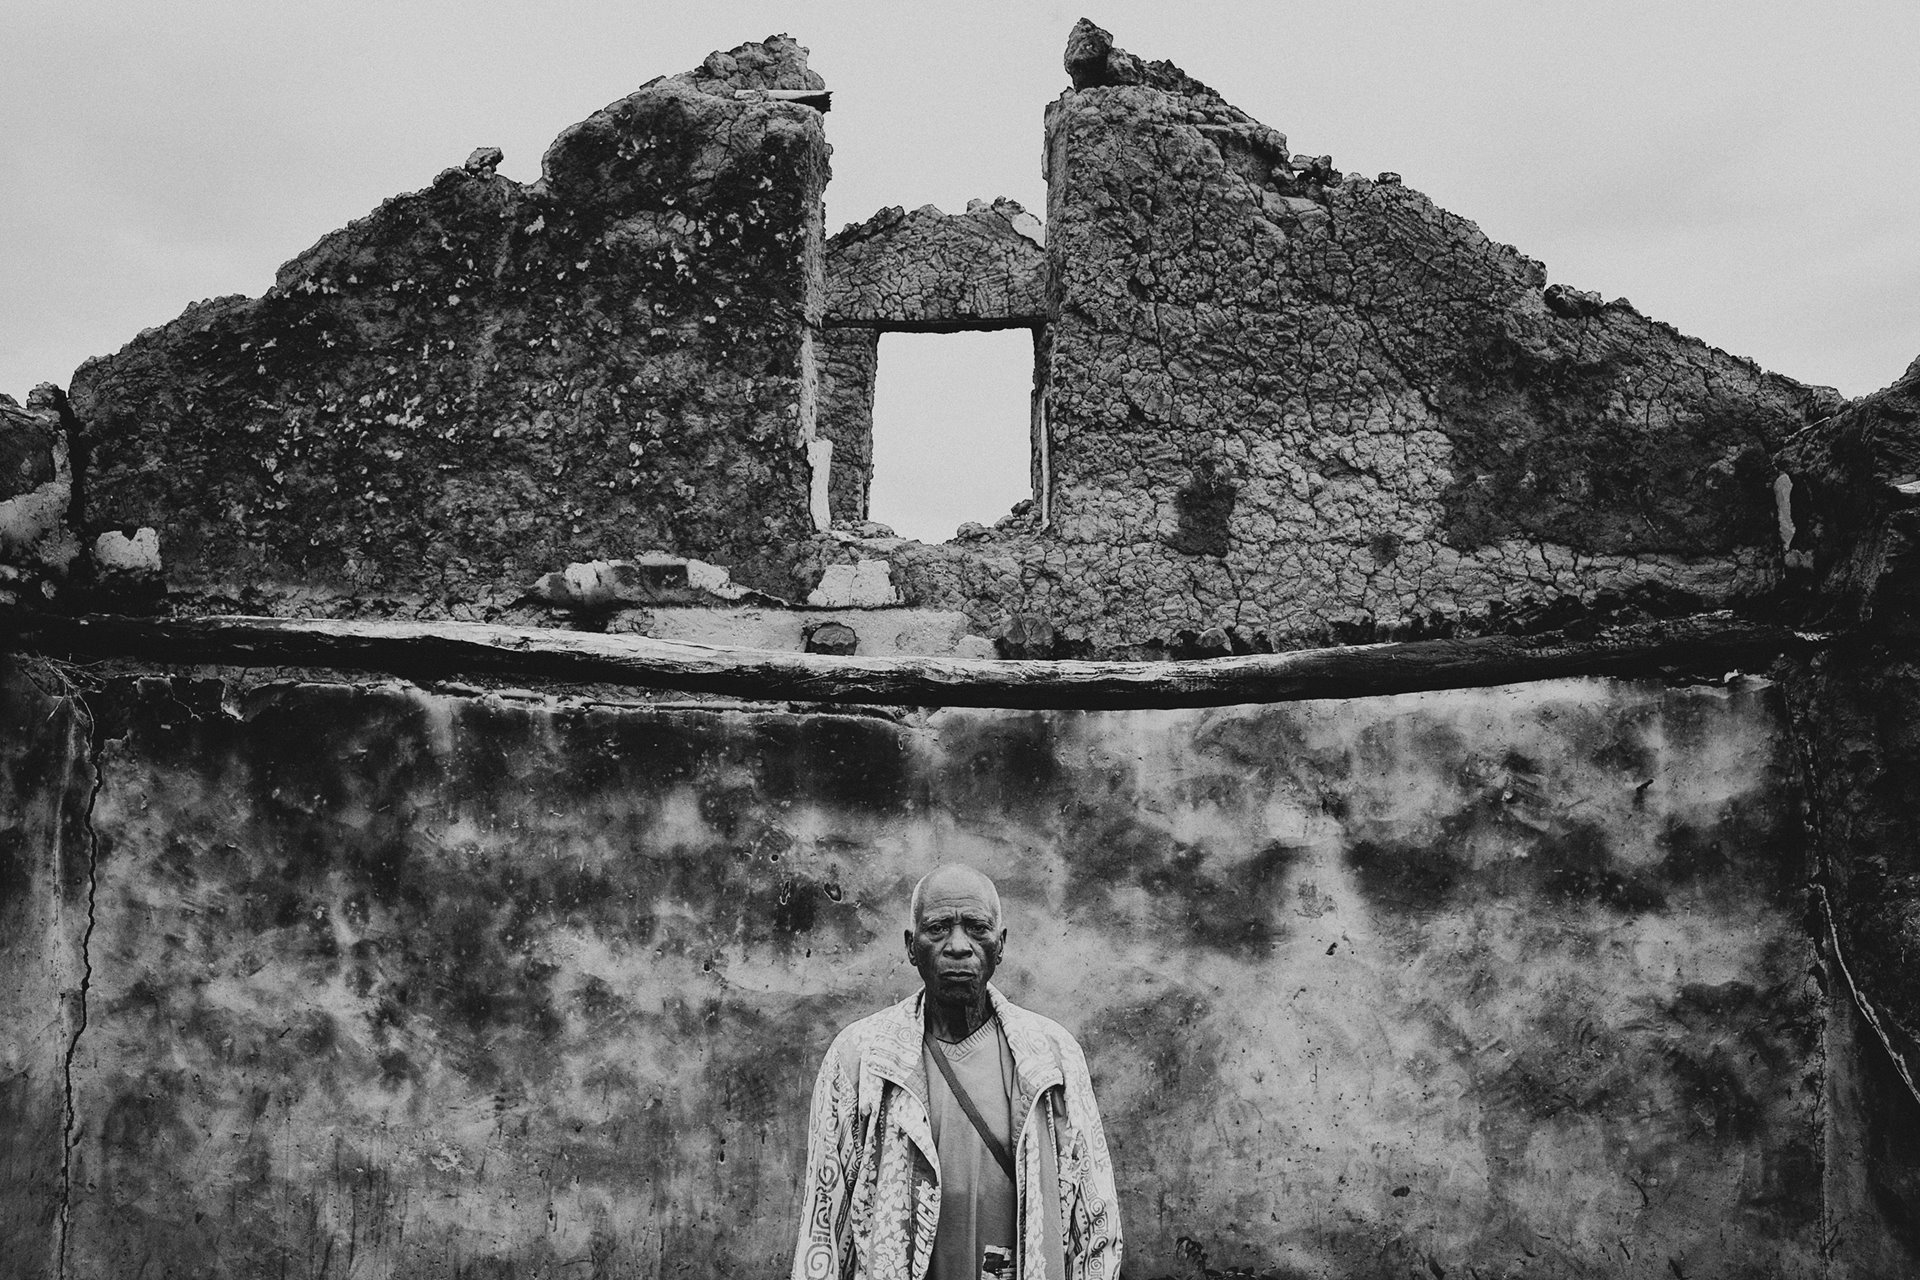 Feve stands in front of the ruins of his home in Andriry, Madagascar, which he says was burned by the military in Operation Tandroka &ndash; a government offensive against cattle thieves in the region. All the rice he had stored was lost in the fire.